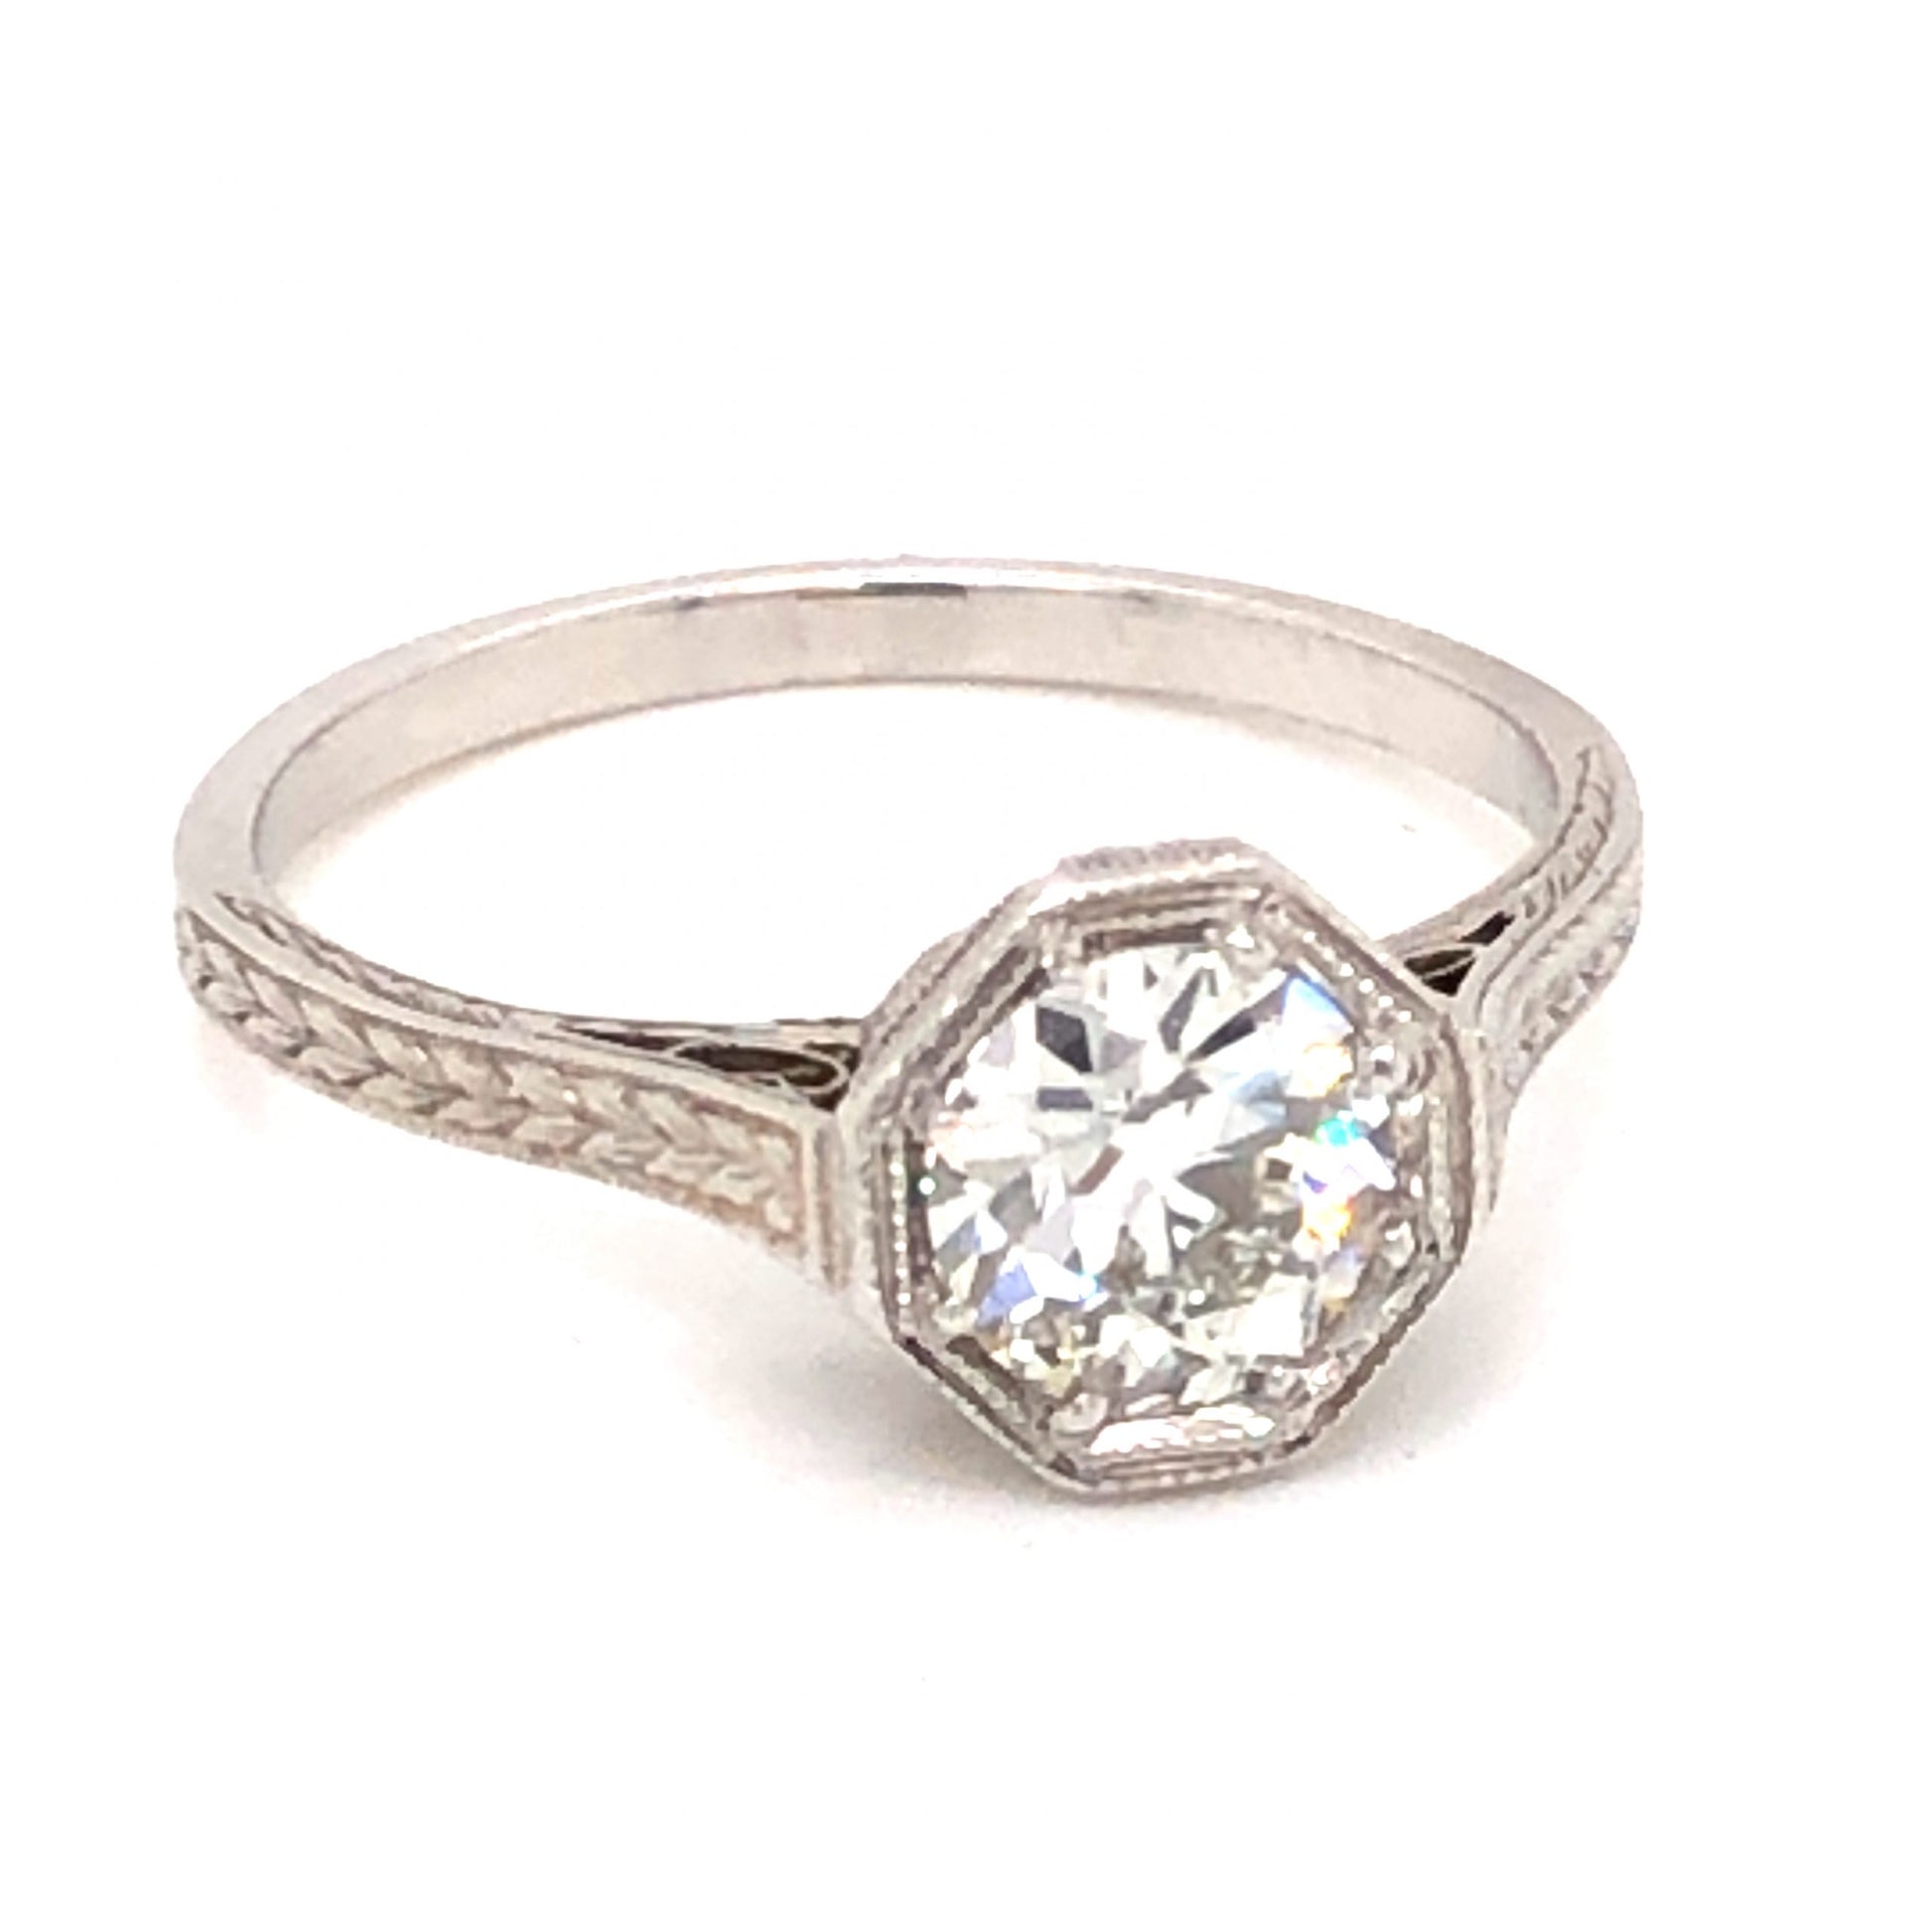 .85 Art Deco Diamond Engagement Ring in PlatinumComposition: PlatinumRing Size: 5.75Total Diamond Weight: .85 ctTotal Gram Weight: 3.0 g